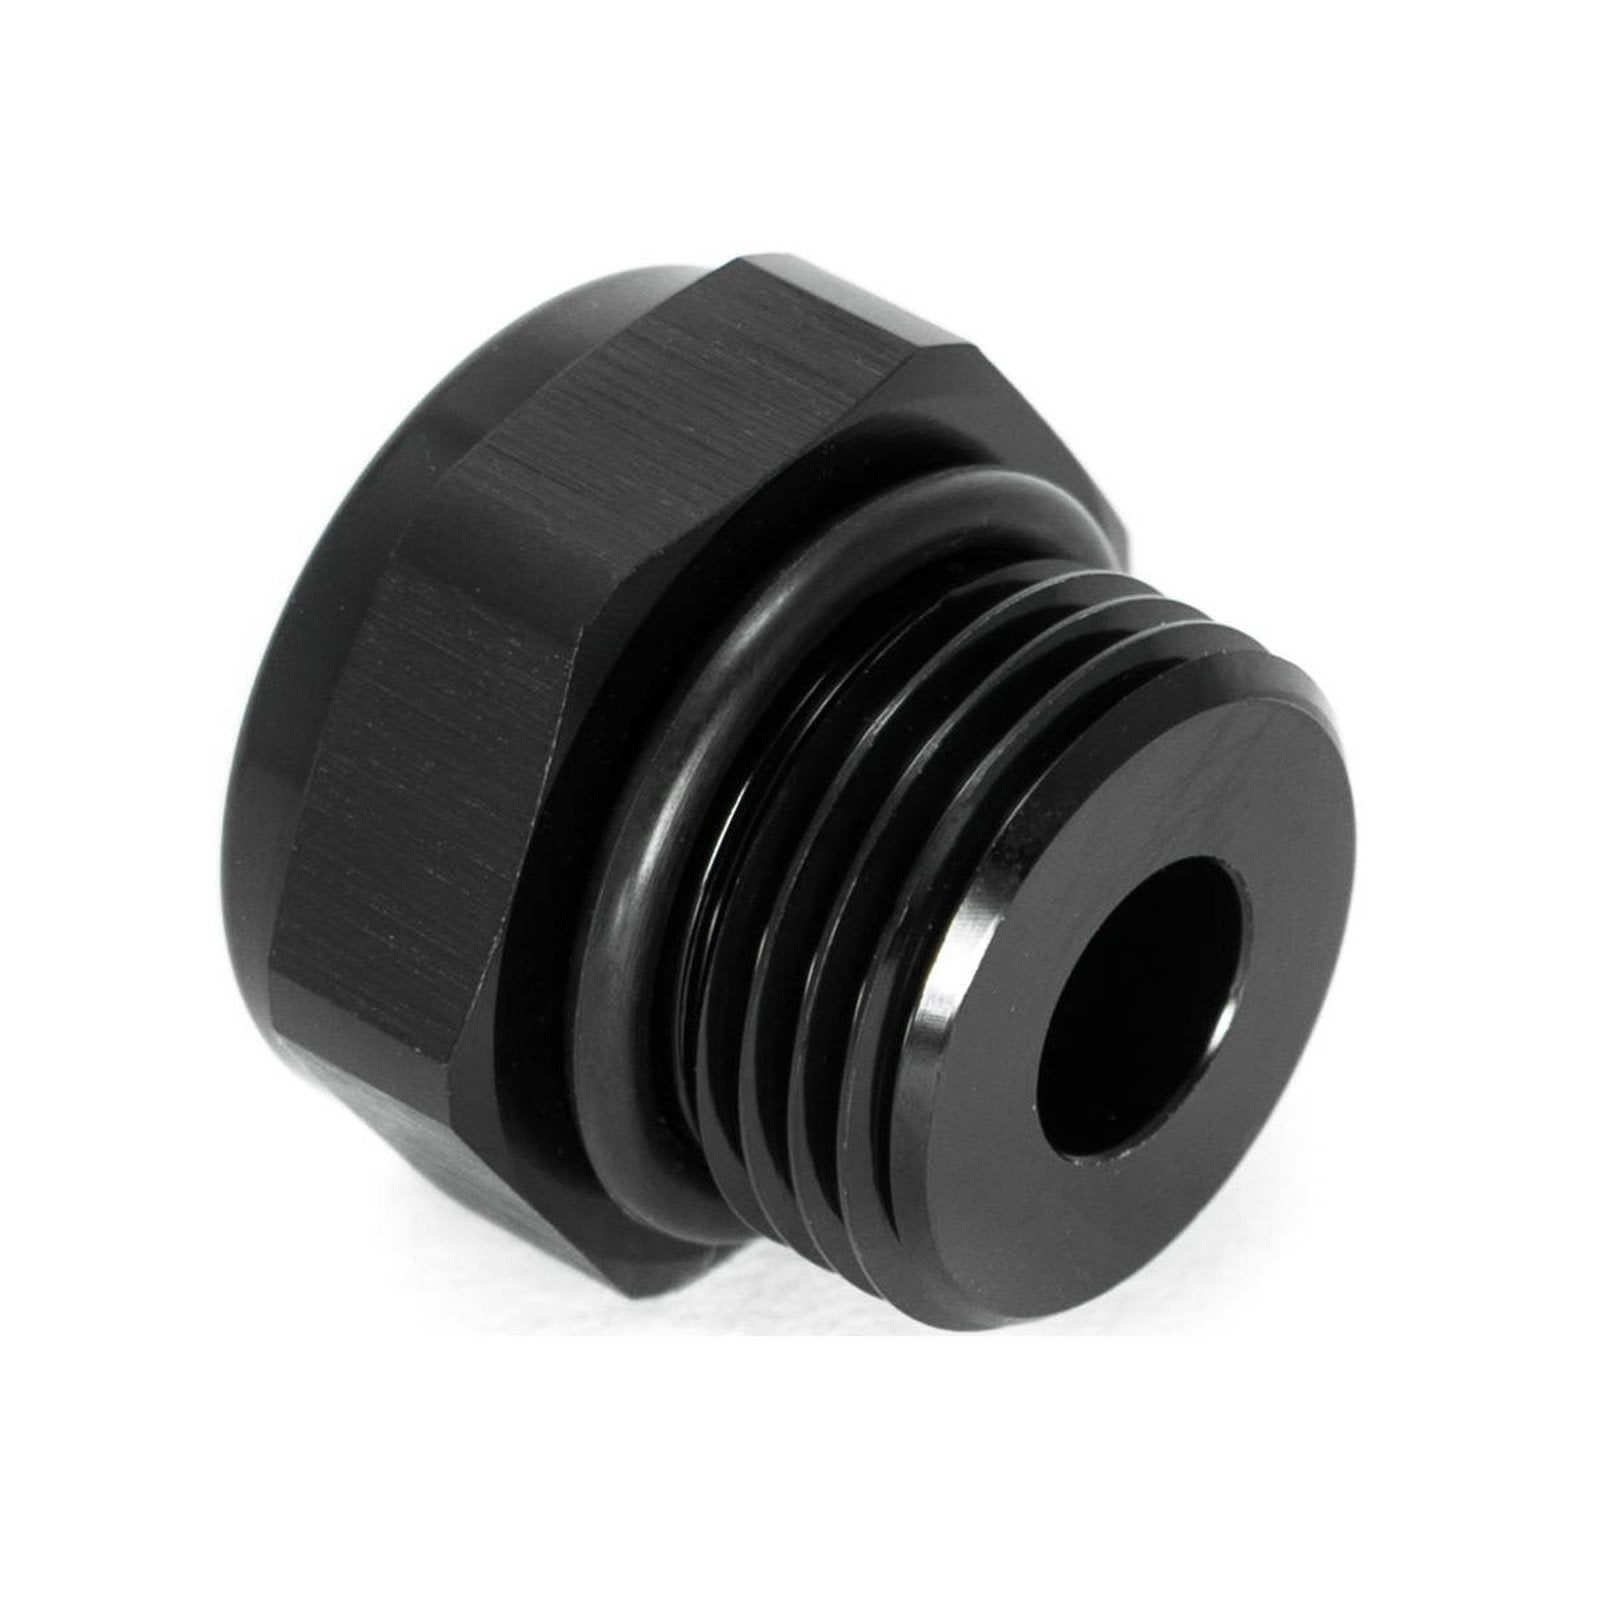 SETRAB sensor adapter -08 AN / Dash 8 male to 1/8" NPT with O-ring high-flow